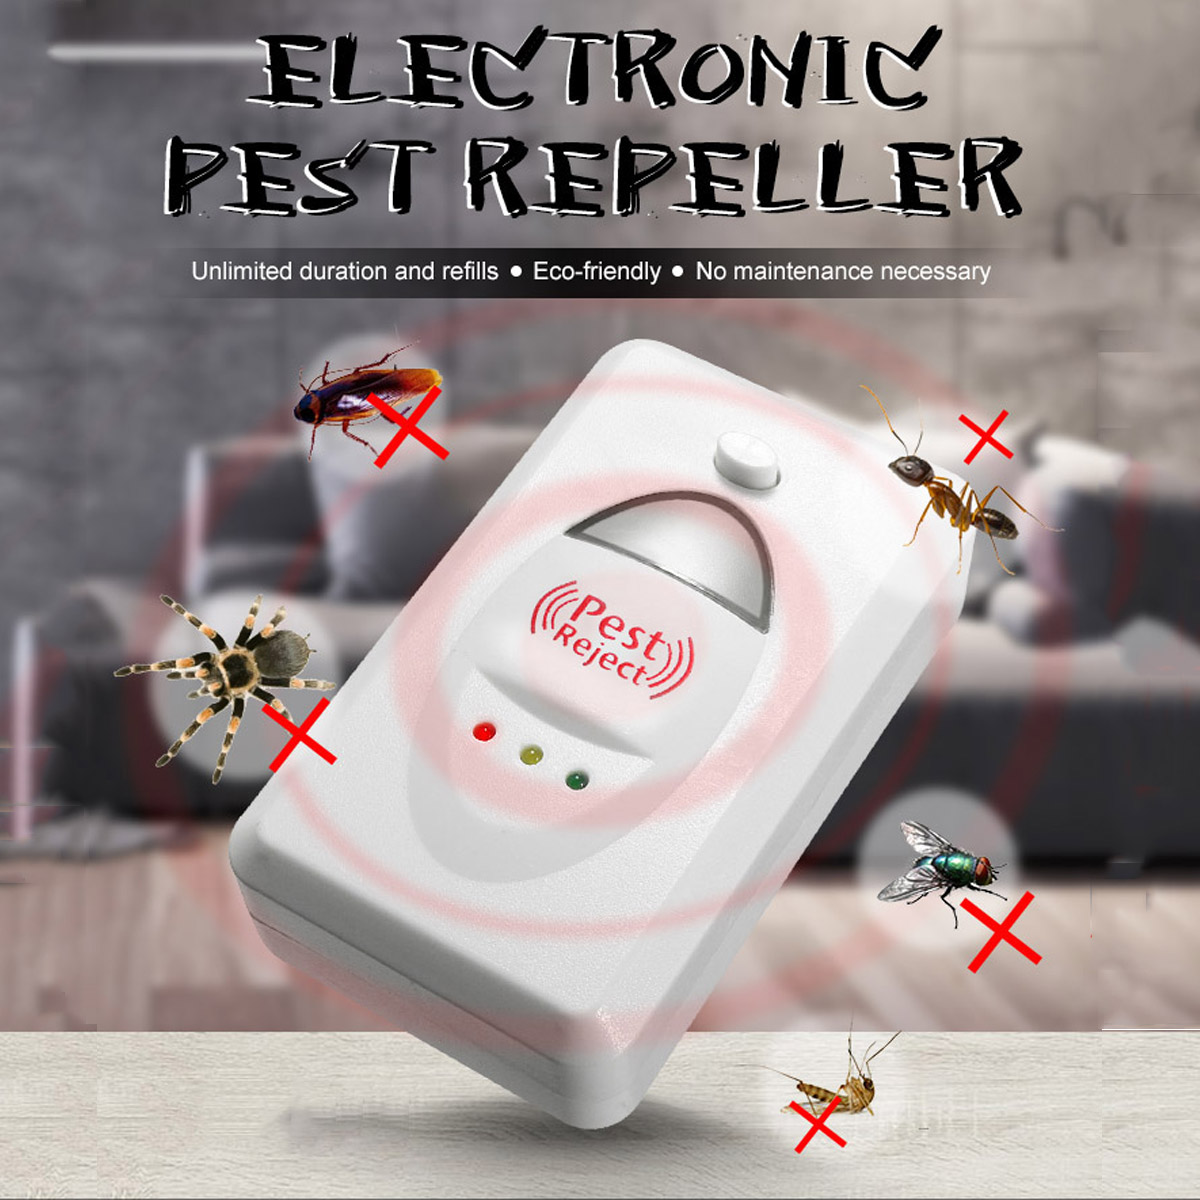 110V-Ultrasonic-Electronic-Pest-Dispeller-Reject-Anti-Mosquito-Bug-Insect-Enhanced-PVC-1612001-1